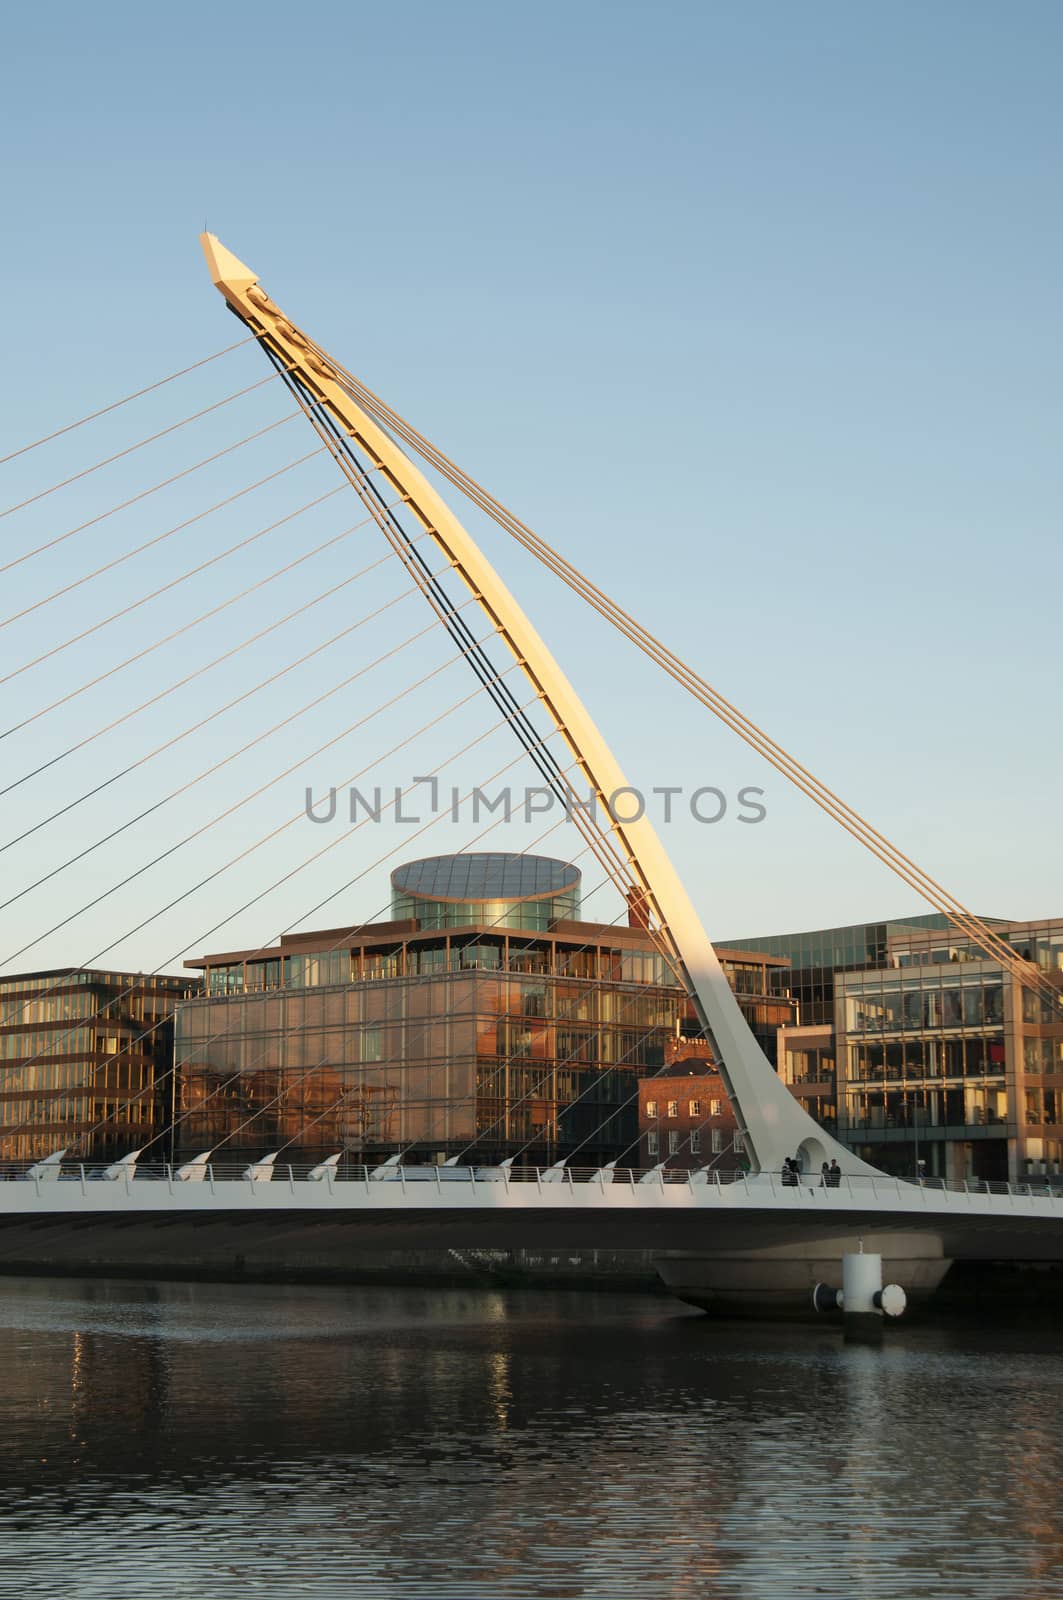 Samuel Beckett Bridge (Irish: Droichead Samuel Beckett) is a cable-stayed bridge in Dublin that joins Sir John Rogerson's Quay on the south side of the River Liffey to Guild Street and North Wall Quay in the Docklands area.